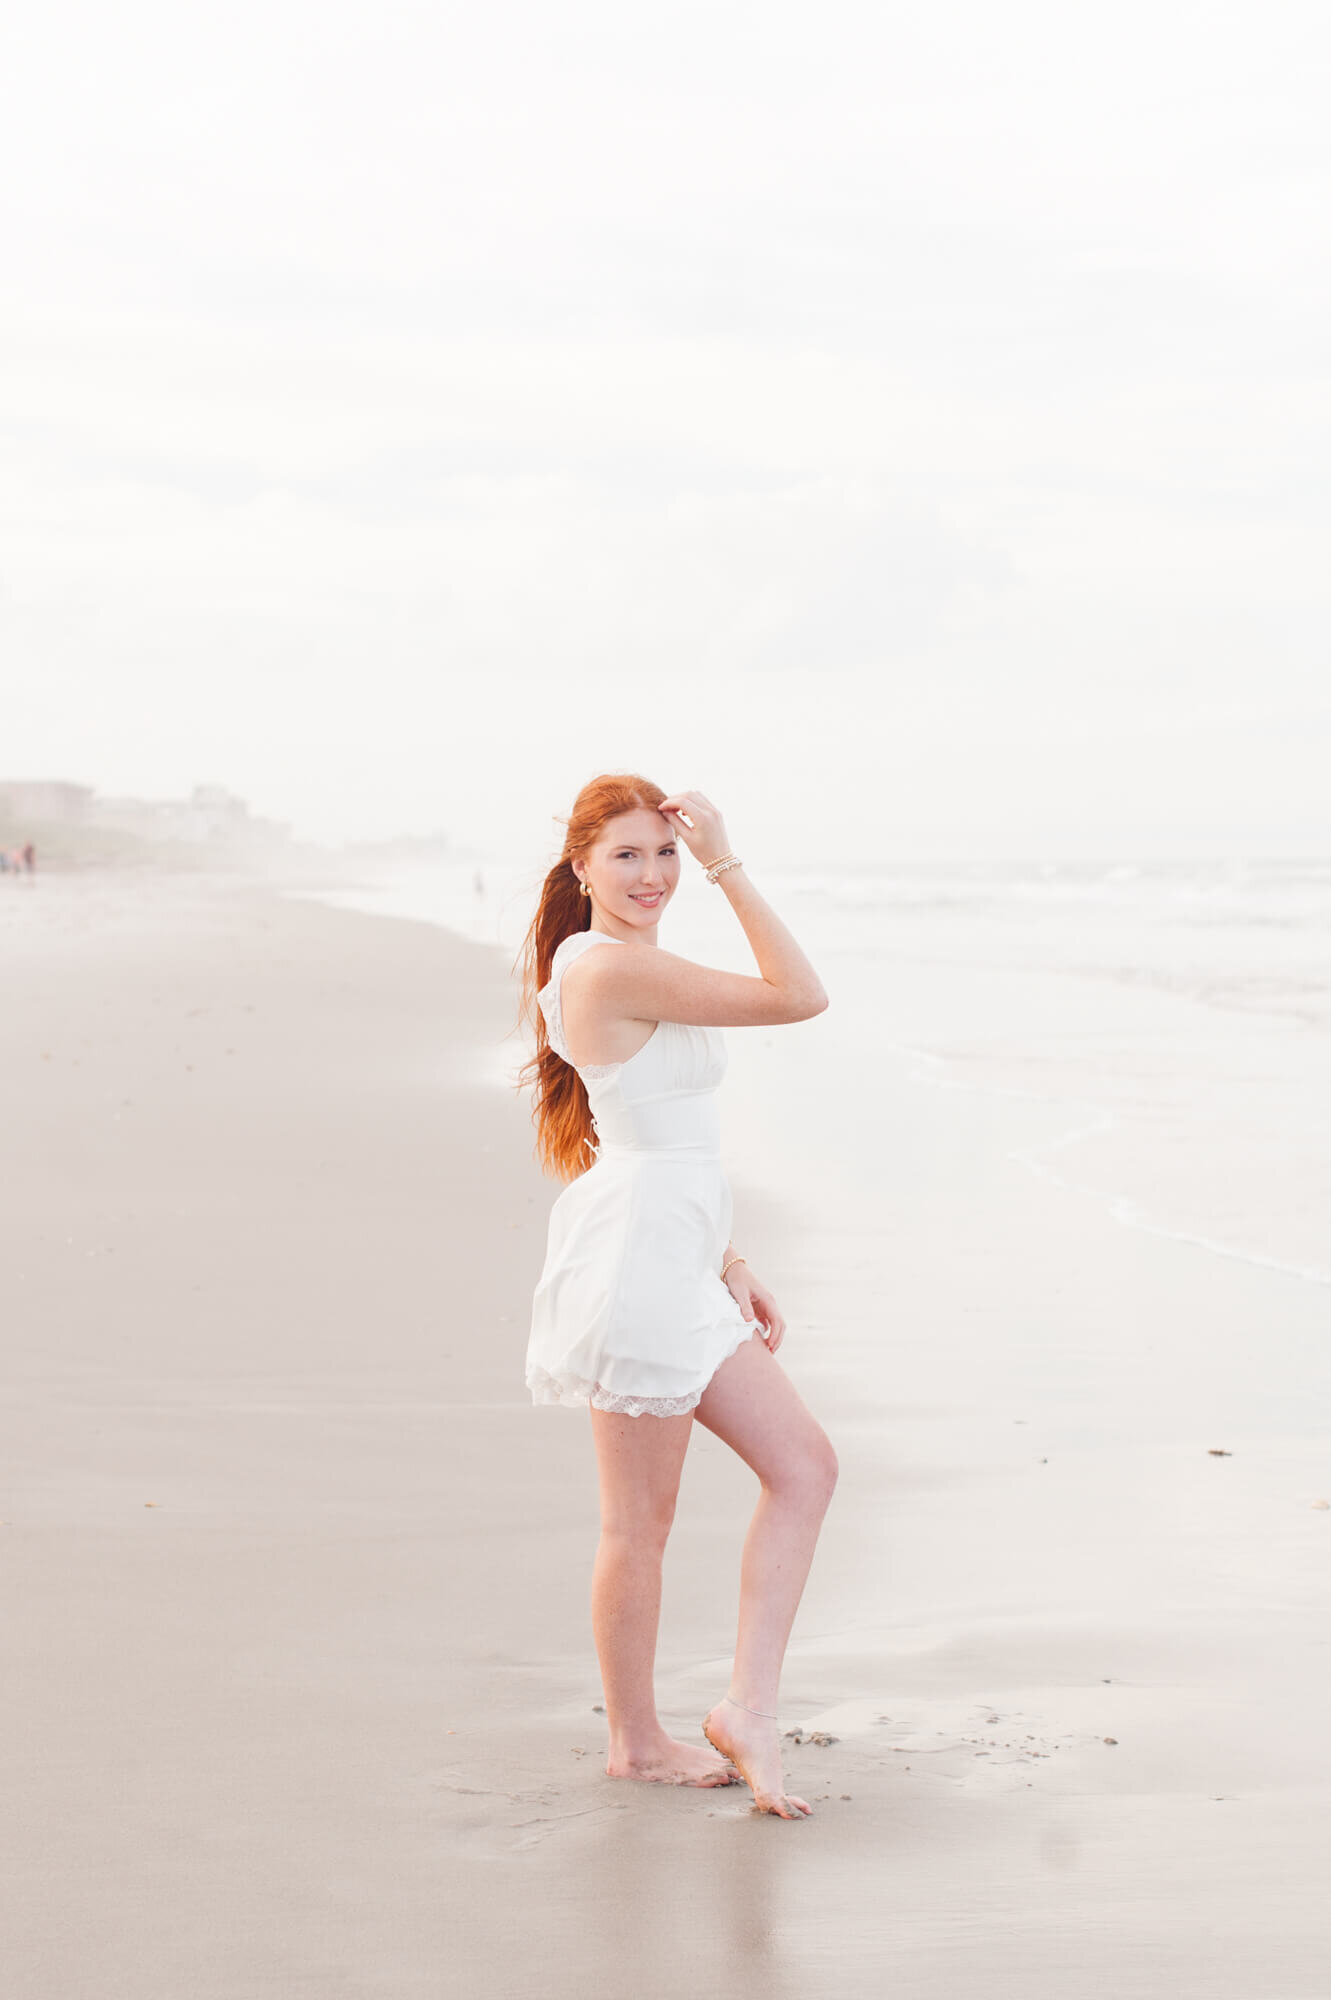 Red headed senior stands on beach in white dress during her senior beach session